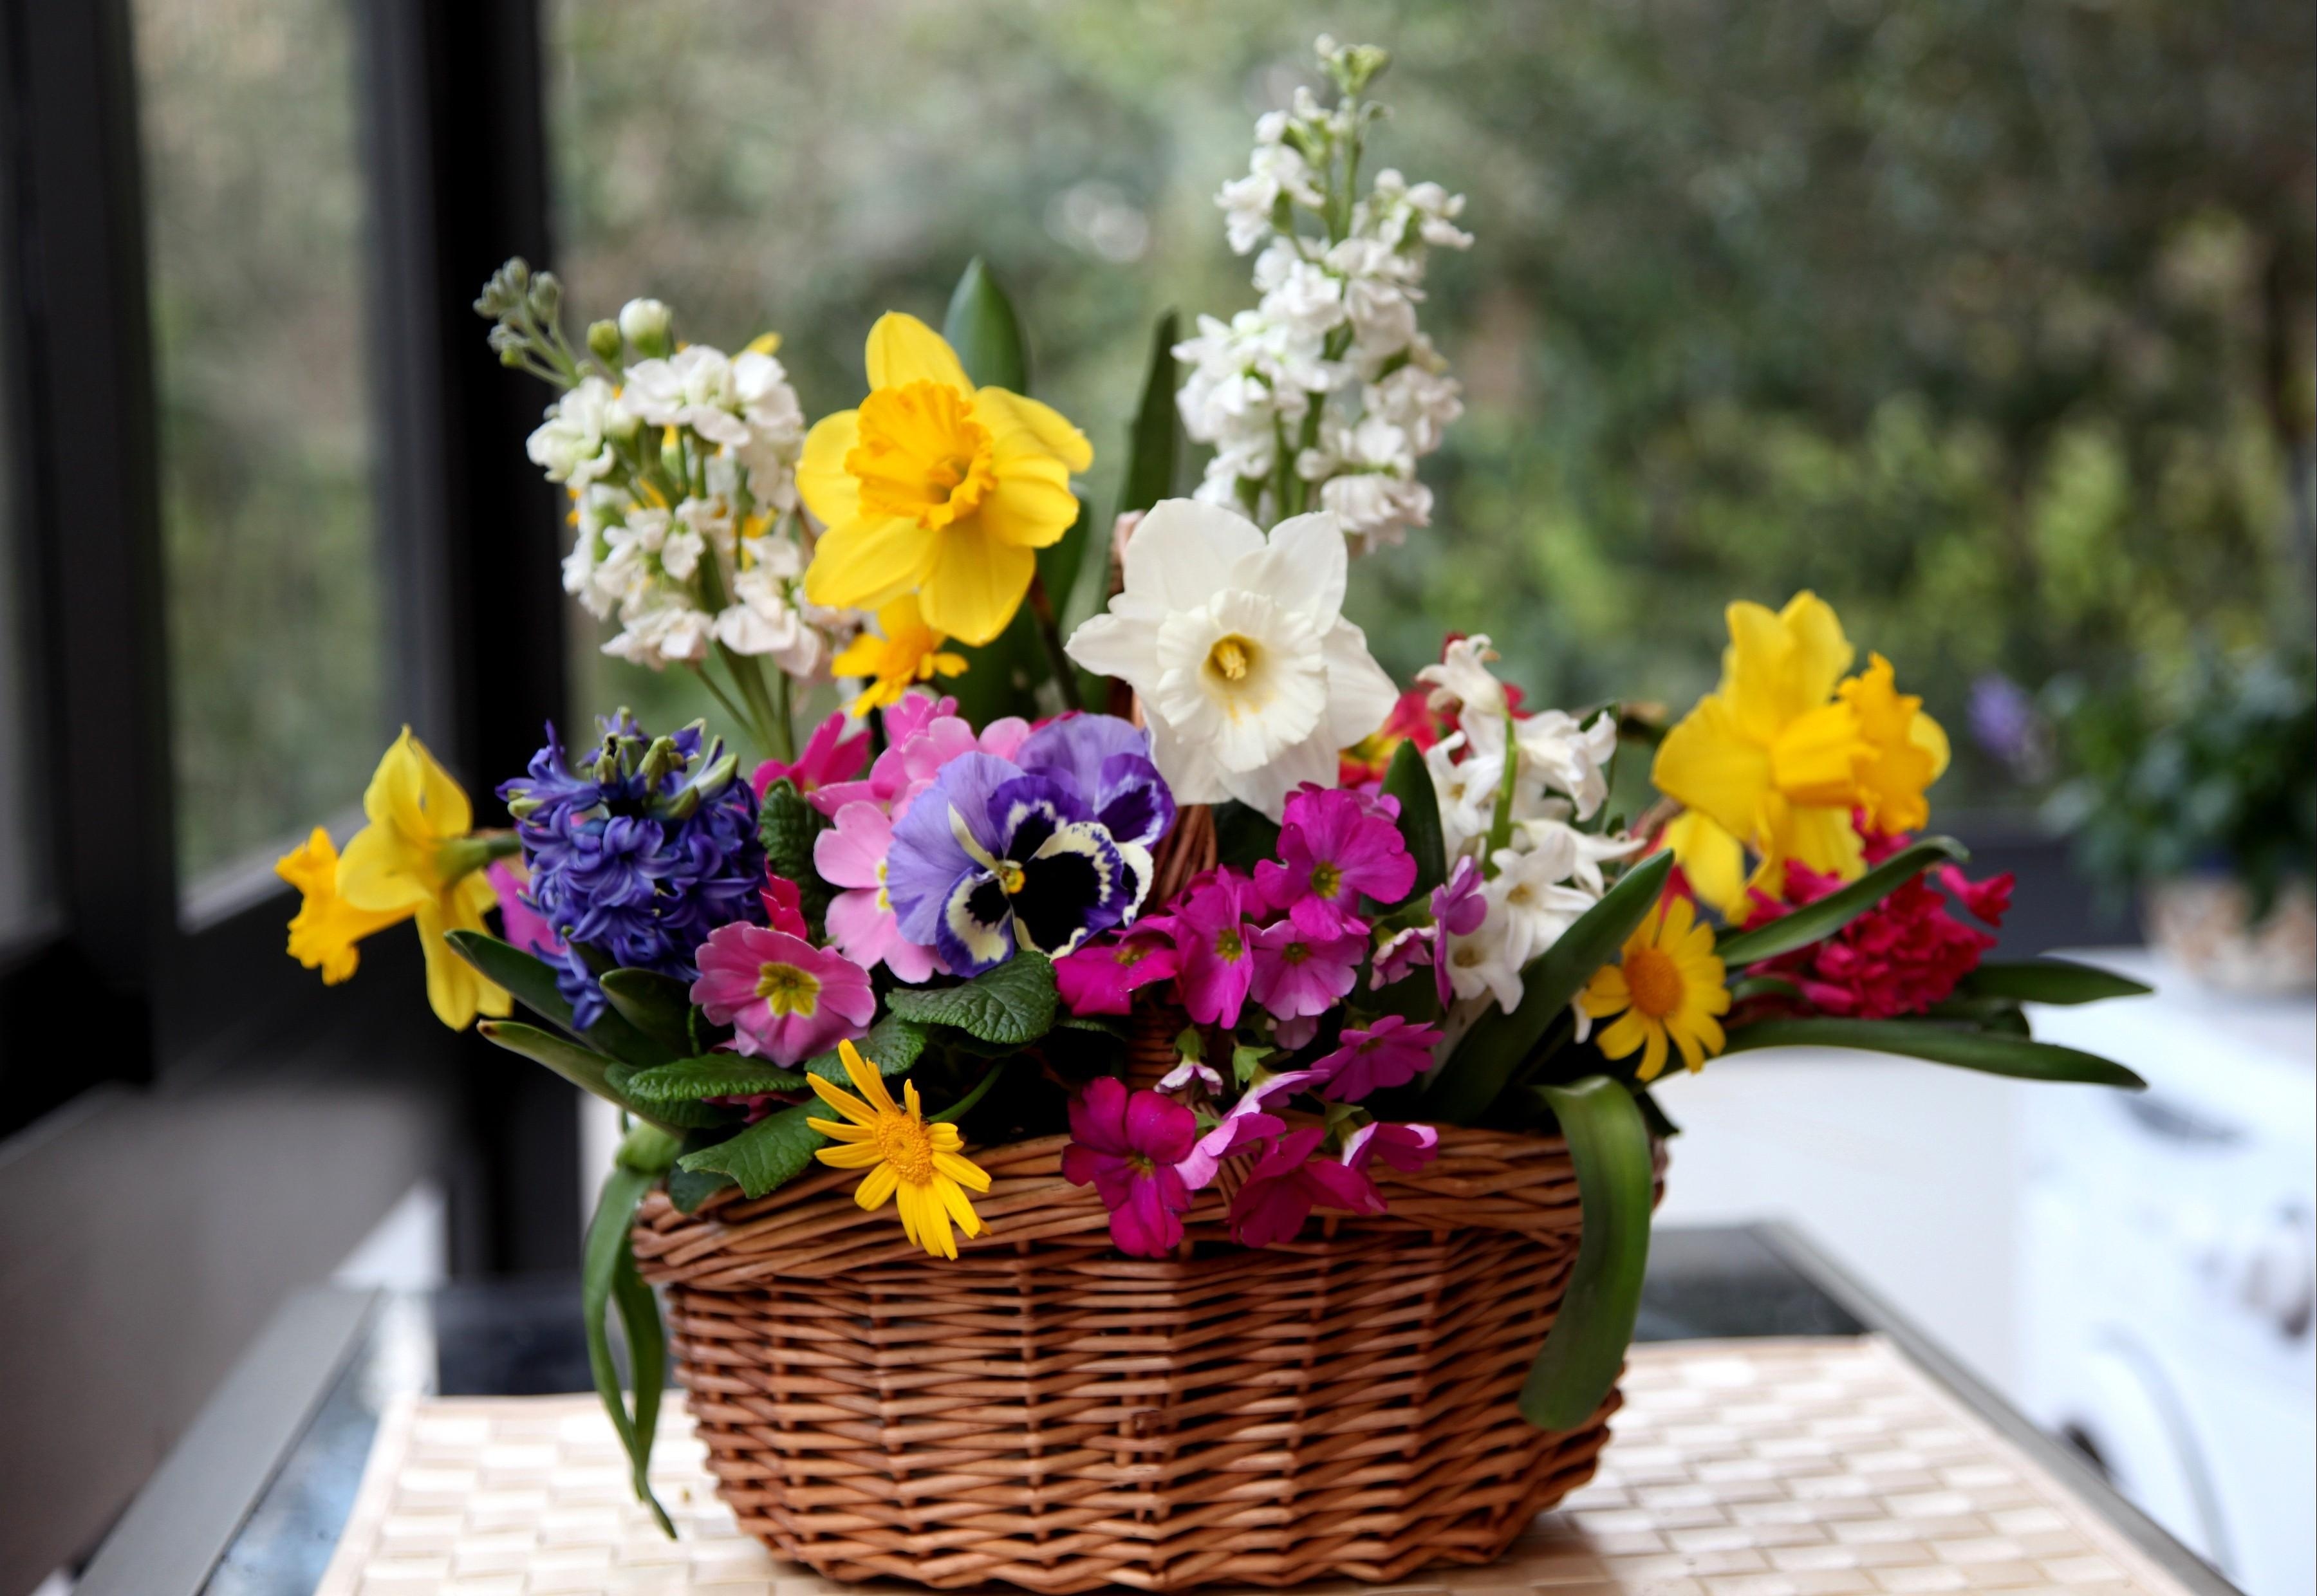 Lock Screen PC Wallpaper flowers, pansies, narcissussi, hyacinth, basket, composition